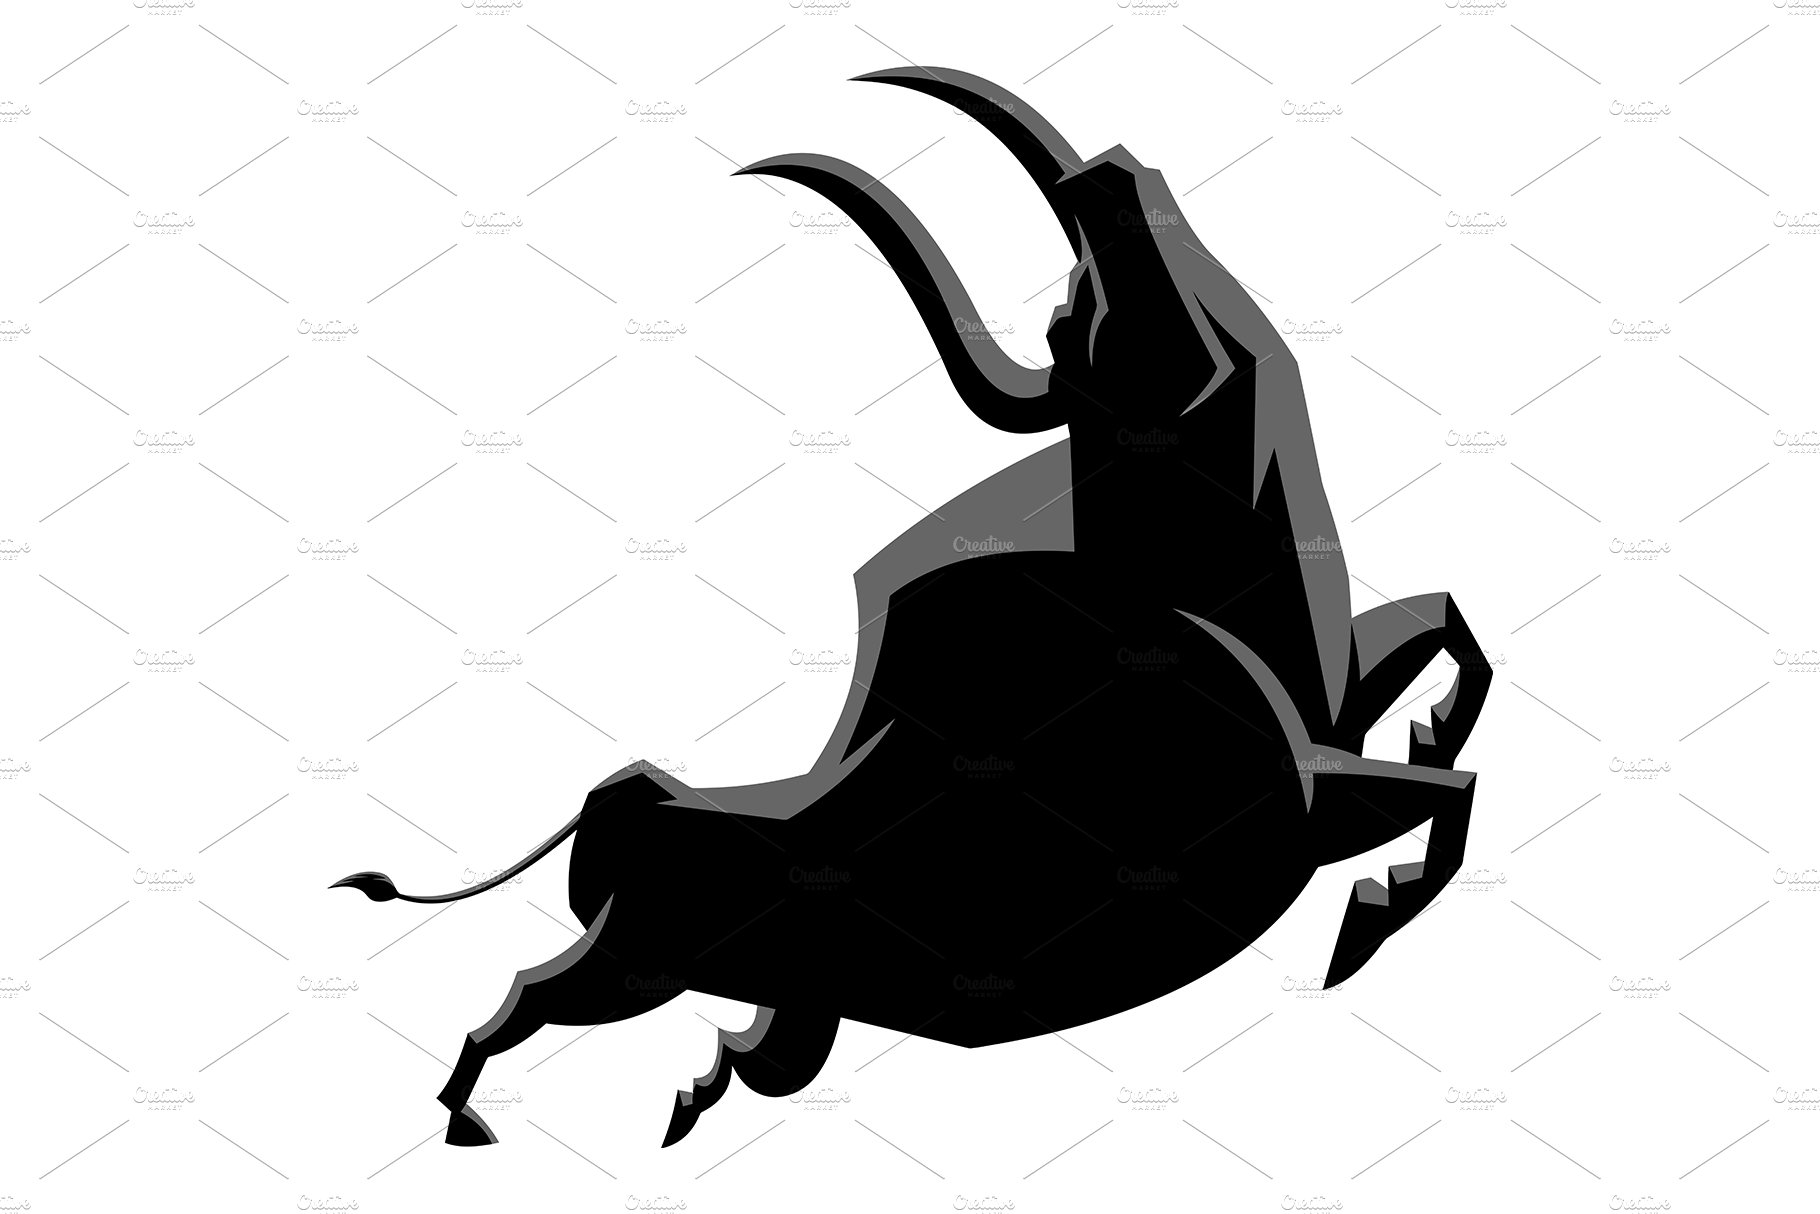 Bull Or Ox Silhouette Symbol Of 2021 cover image.